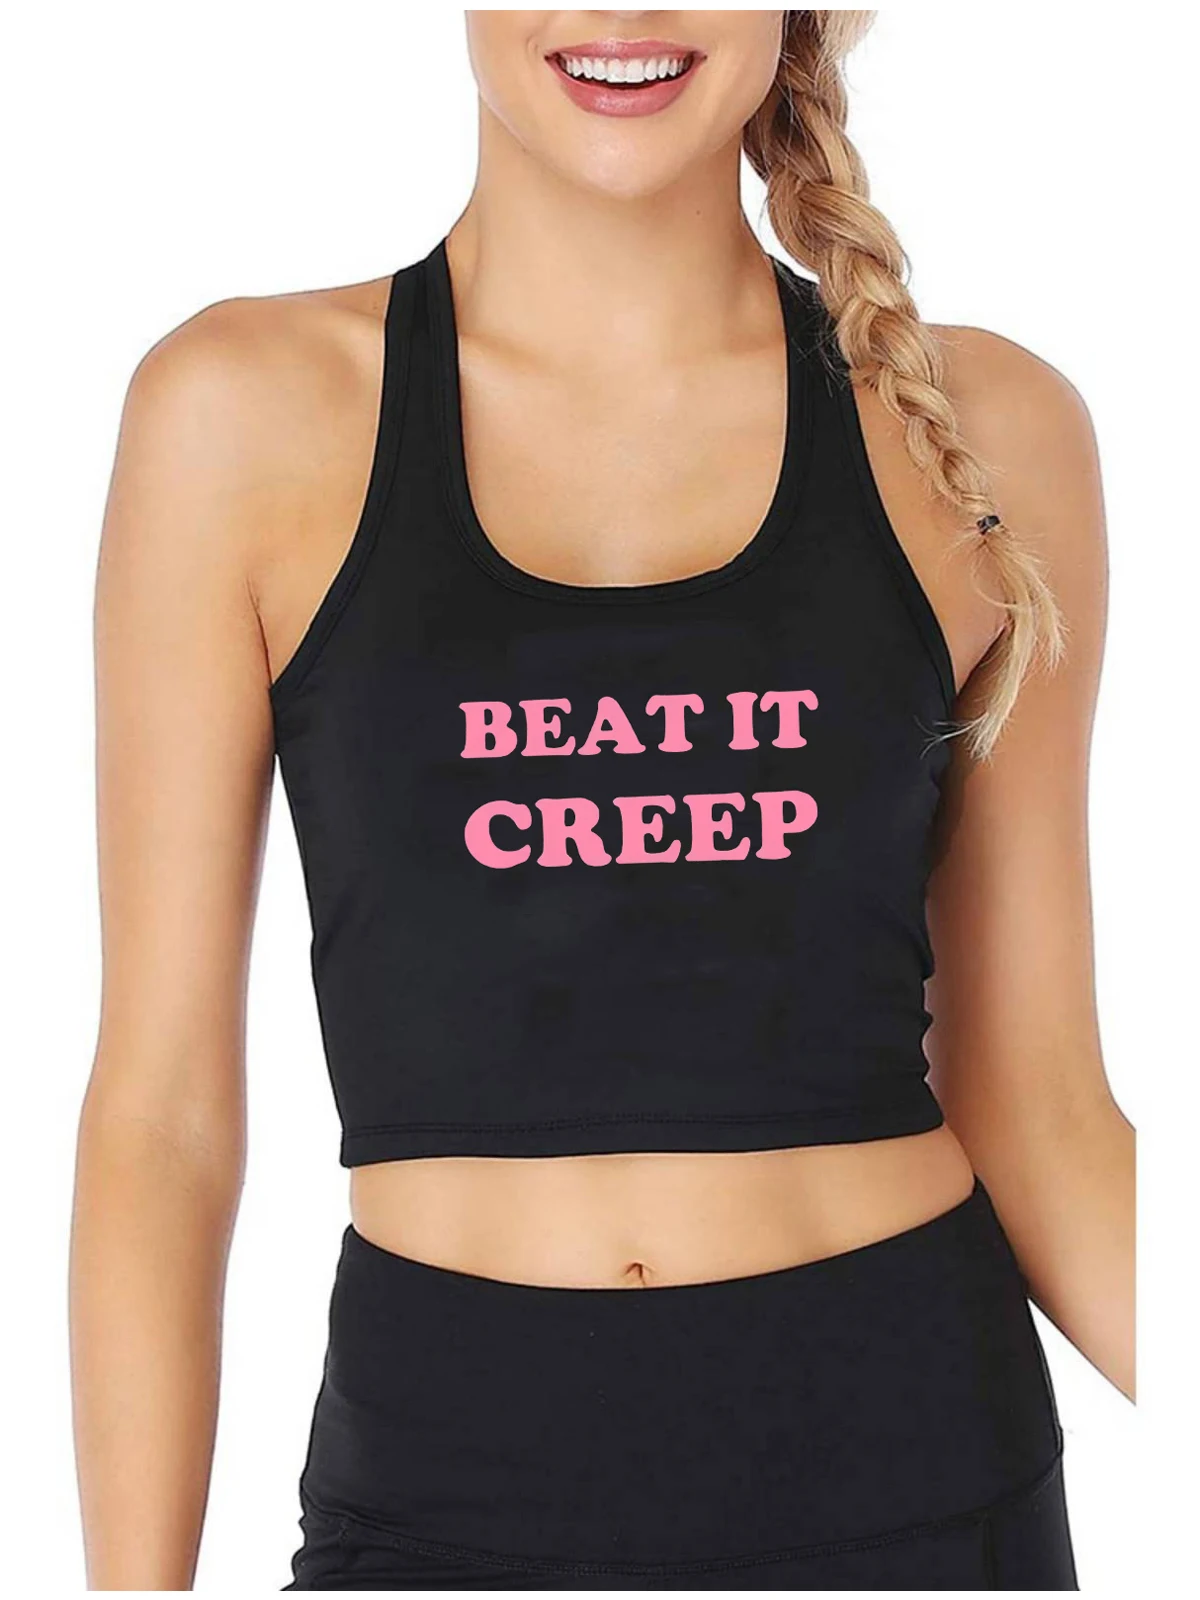 

Beat It Creep Print Sexy Slim Fit Crop Tank Hot Girl Dance Training Cotton Breathable Crop Tops Dance Lovers Sports Camisole